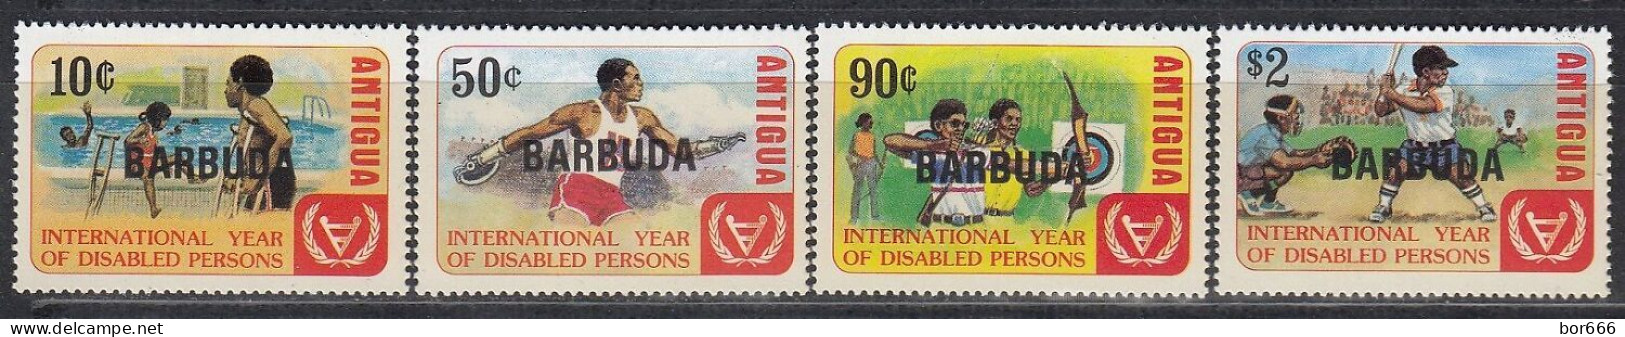 Barbuda - YEAR OF DISABLED PERSONS / SPORT 1981 MNH - Barbuda (...-1981)